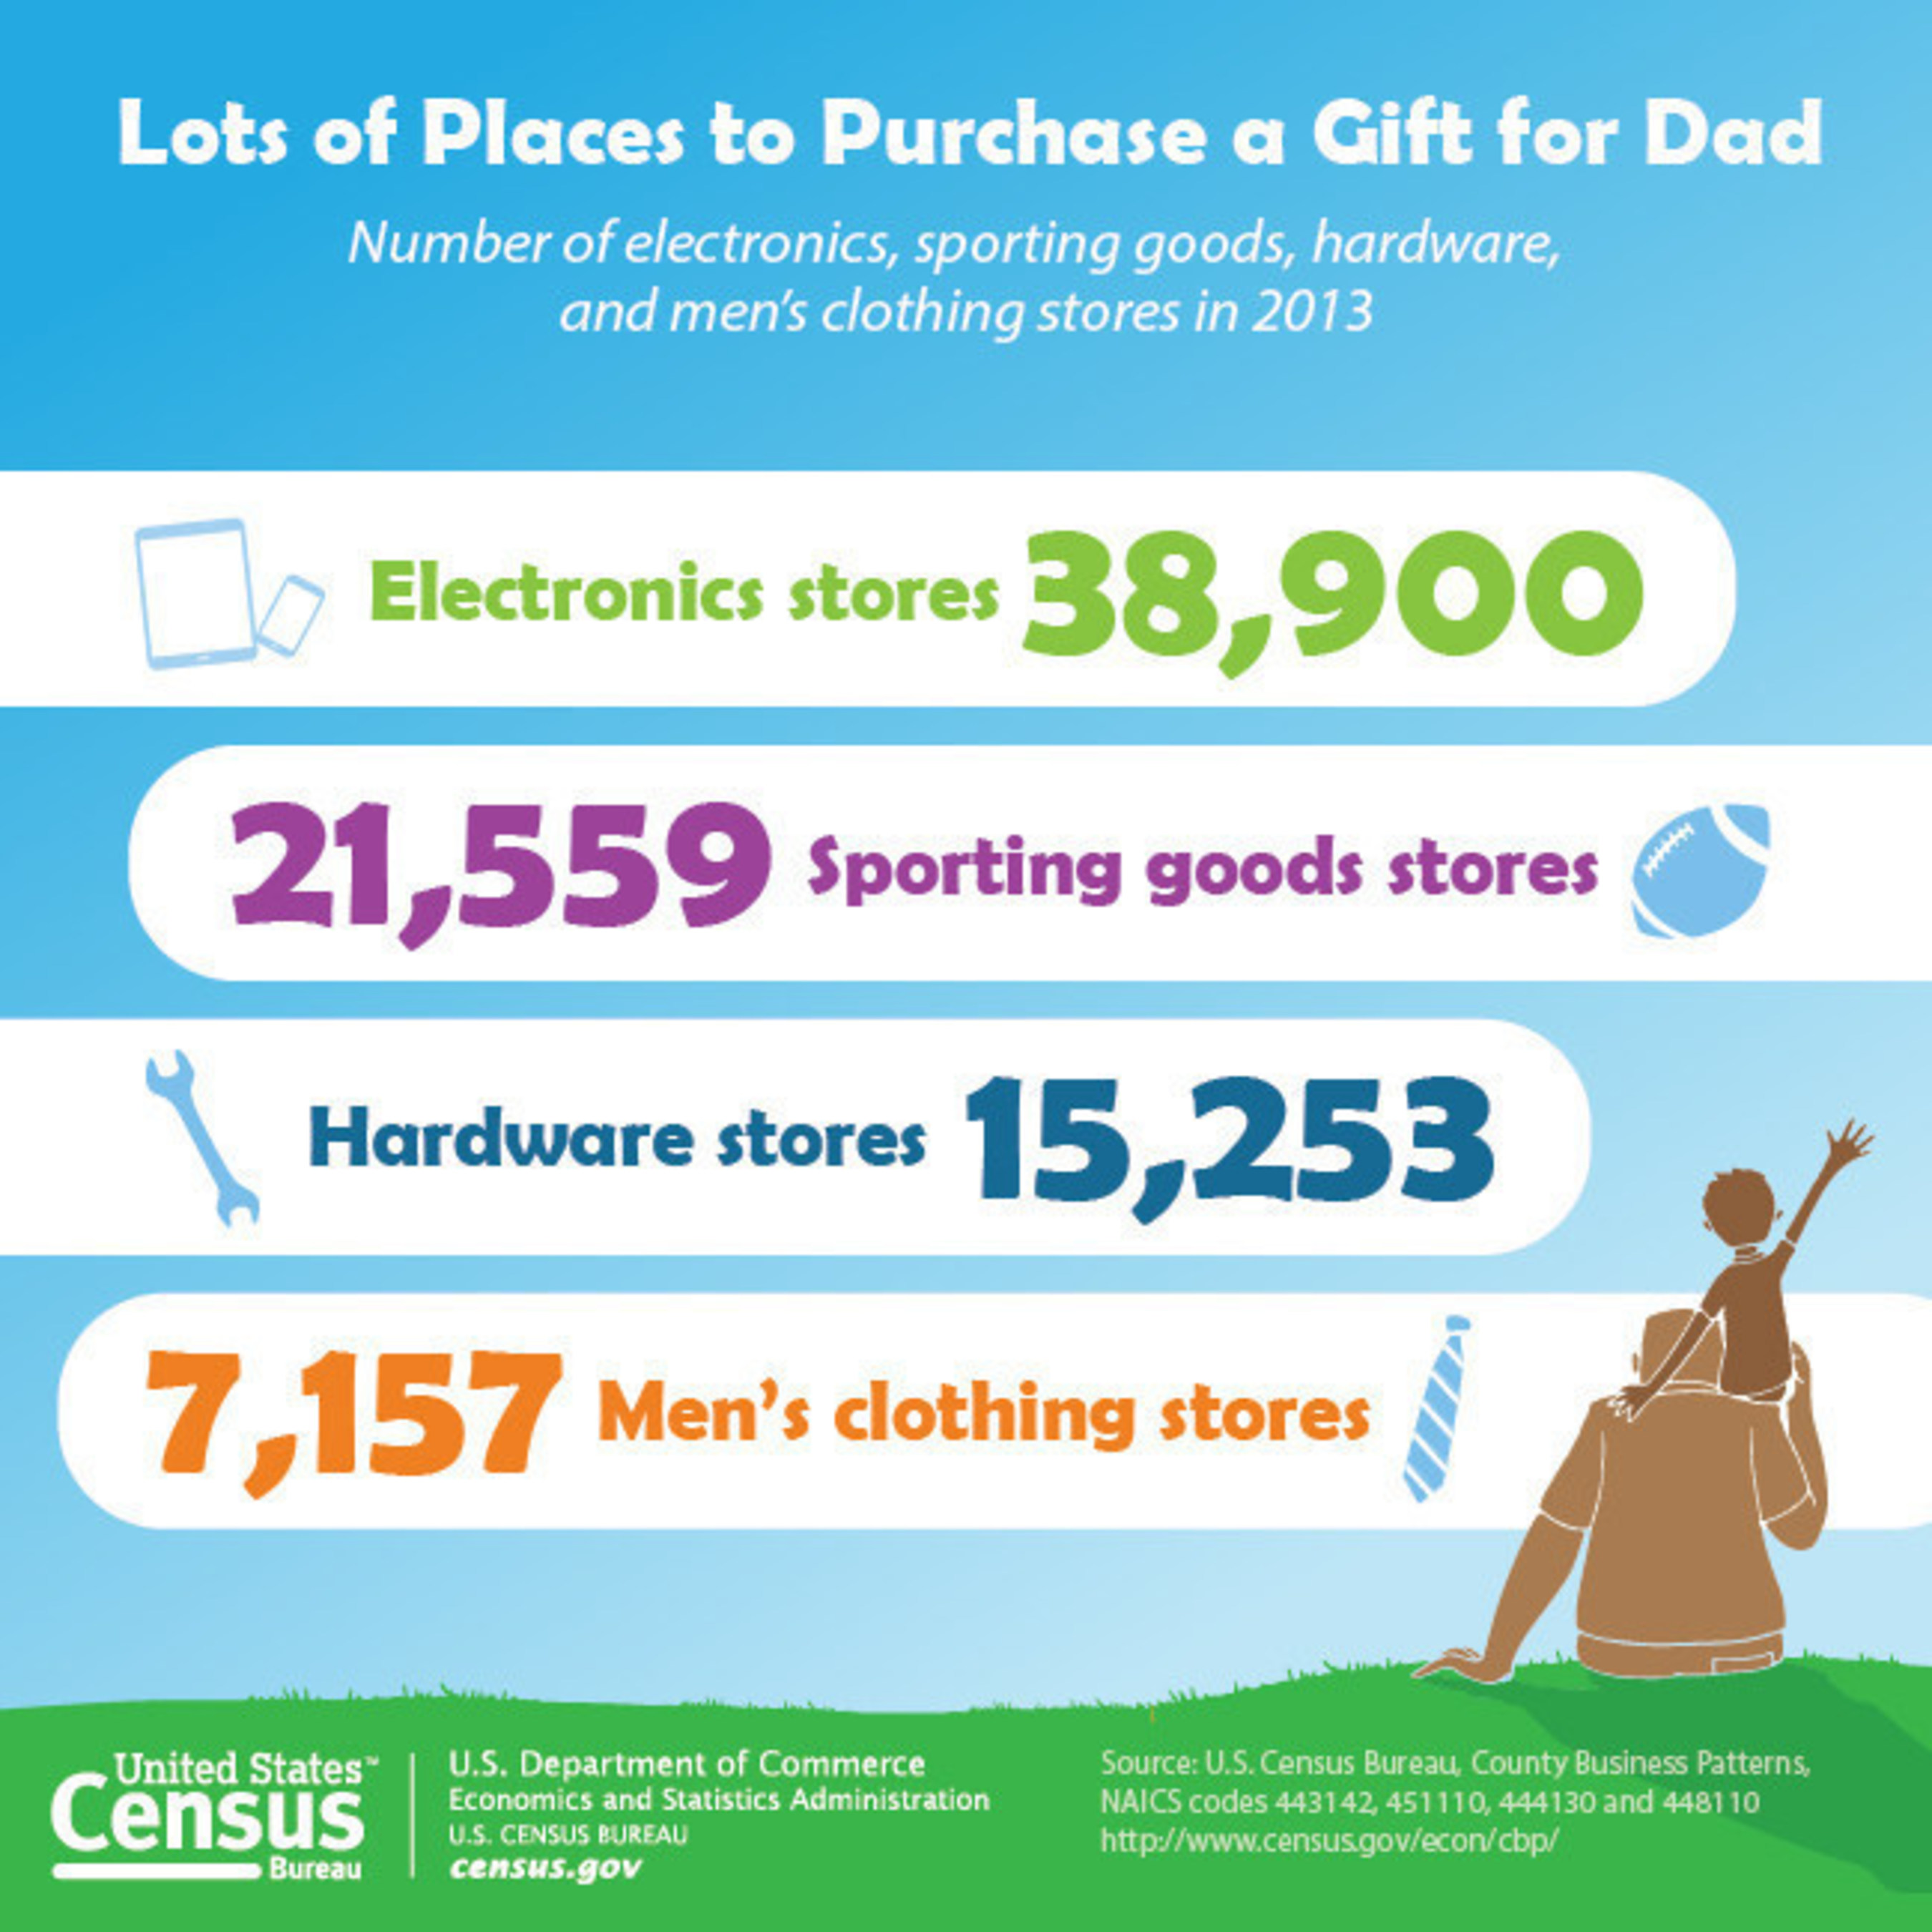 According to the U.S. Census Bureau, in 2013 there were over 82,000 men's clothing, sporting goods and electronics stores.  For more information,  http://www.census.gov/newsroom/facts-for-features/2015/cb15-ff110.html